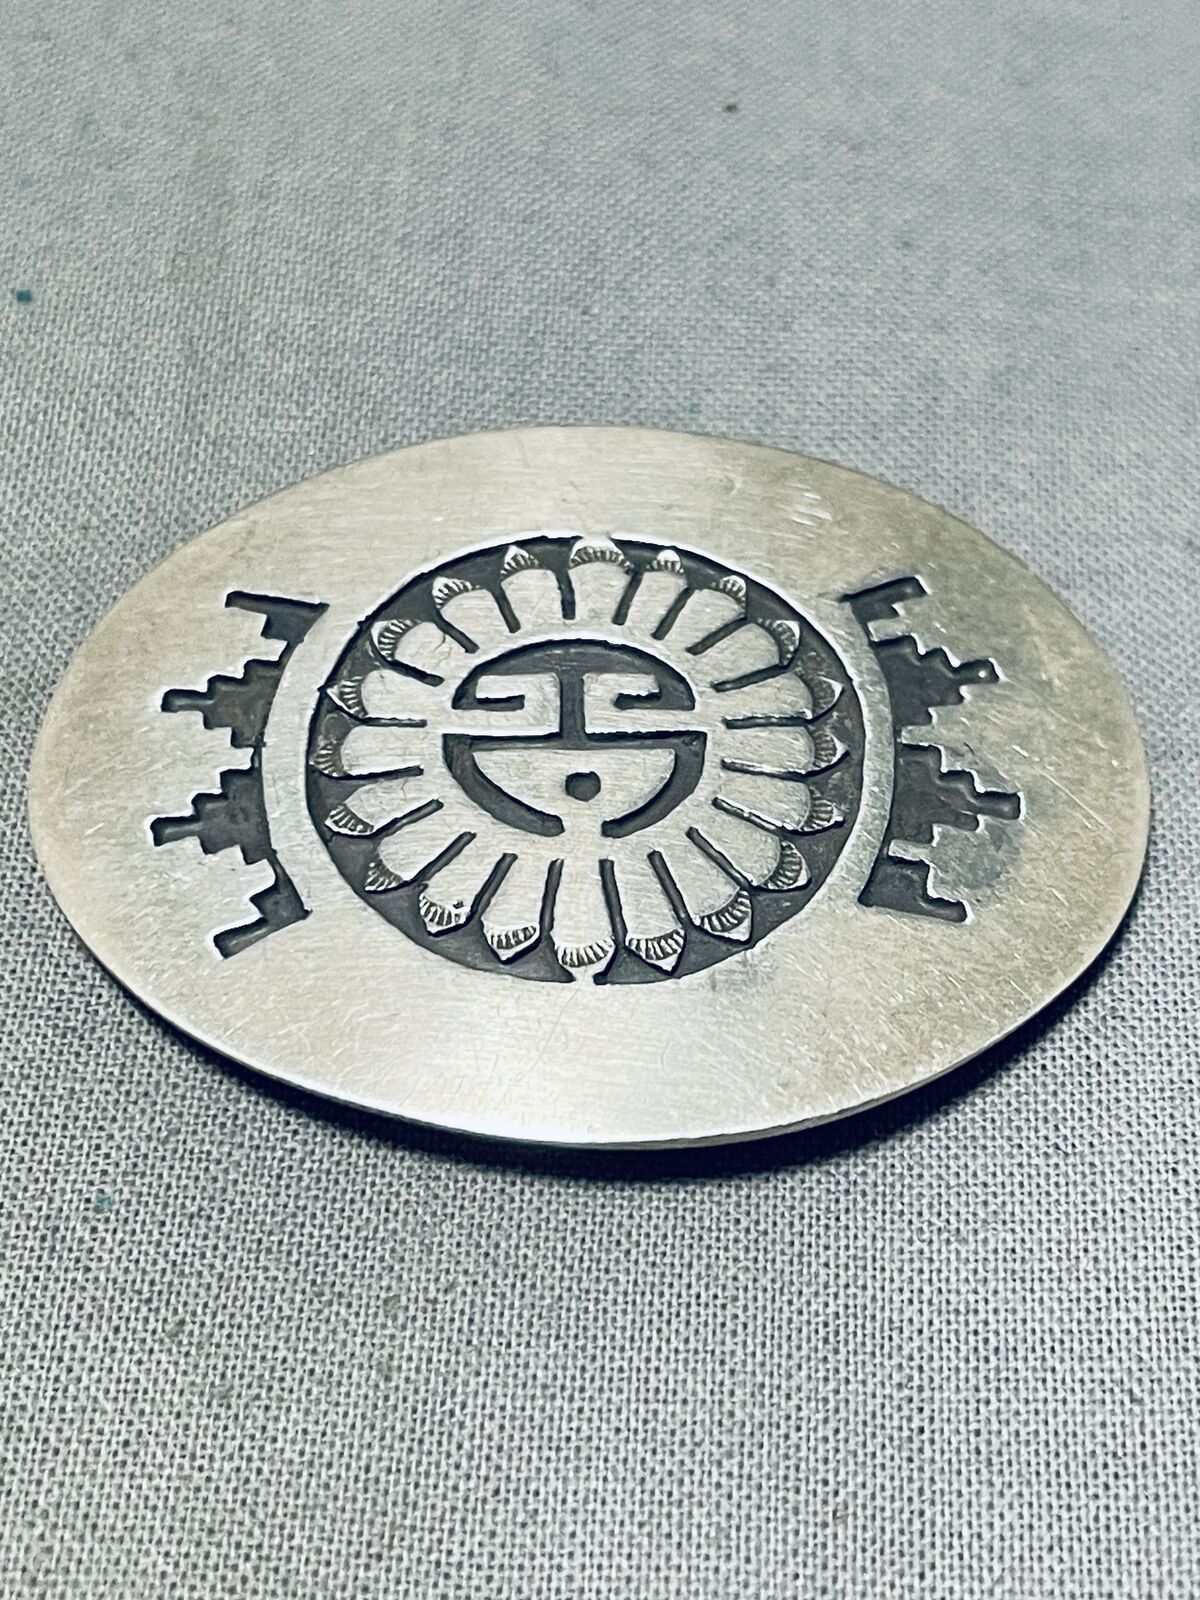 SIGNED VINTAGE NAVAJO STERLING SILVER SUNFACE PIN